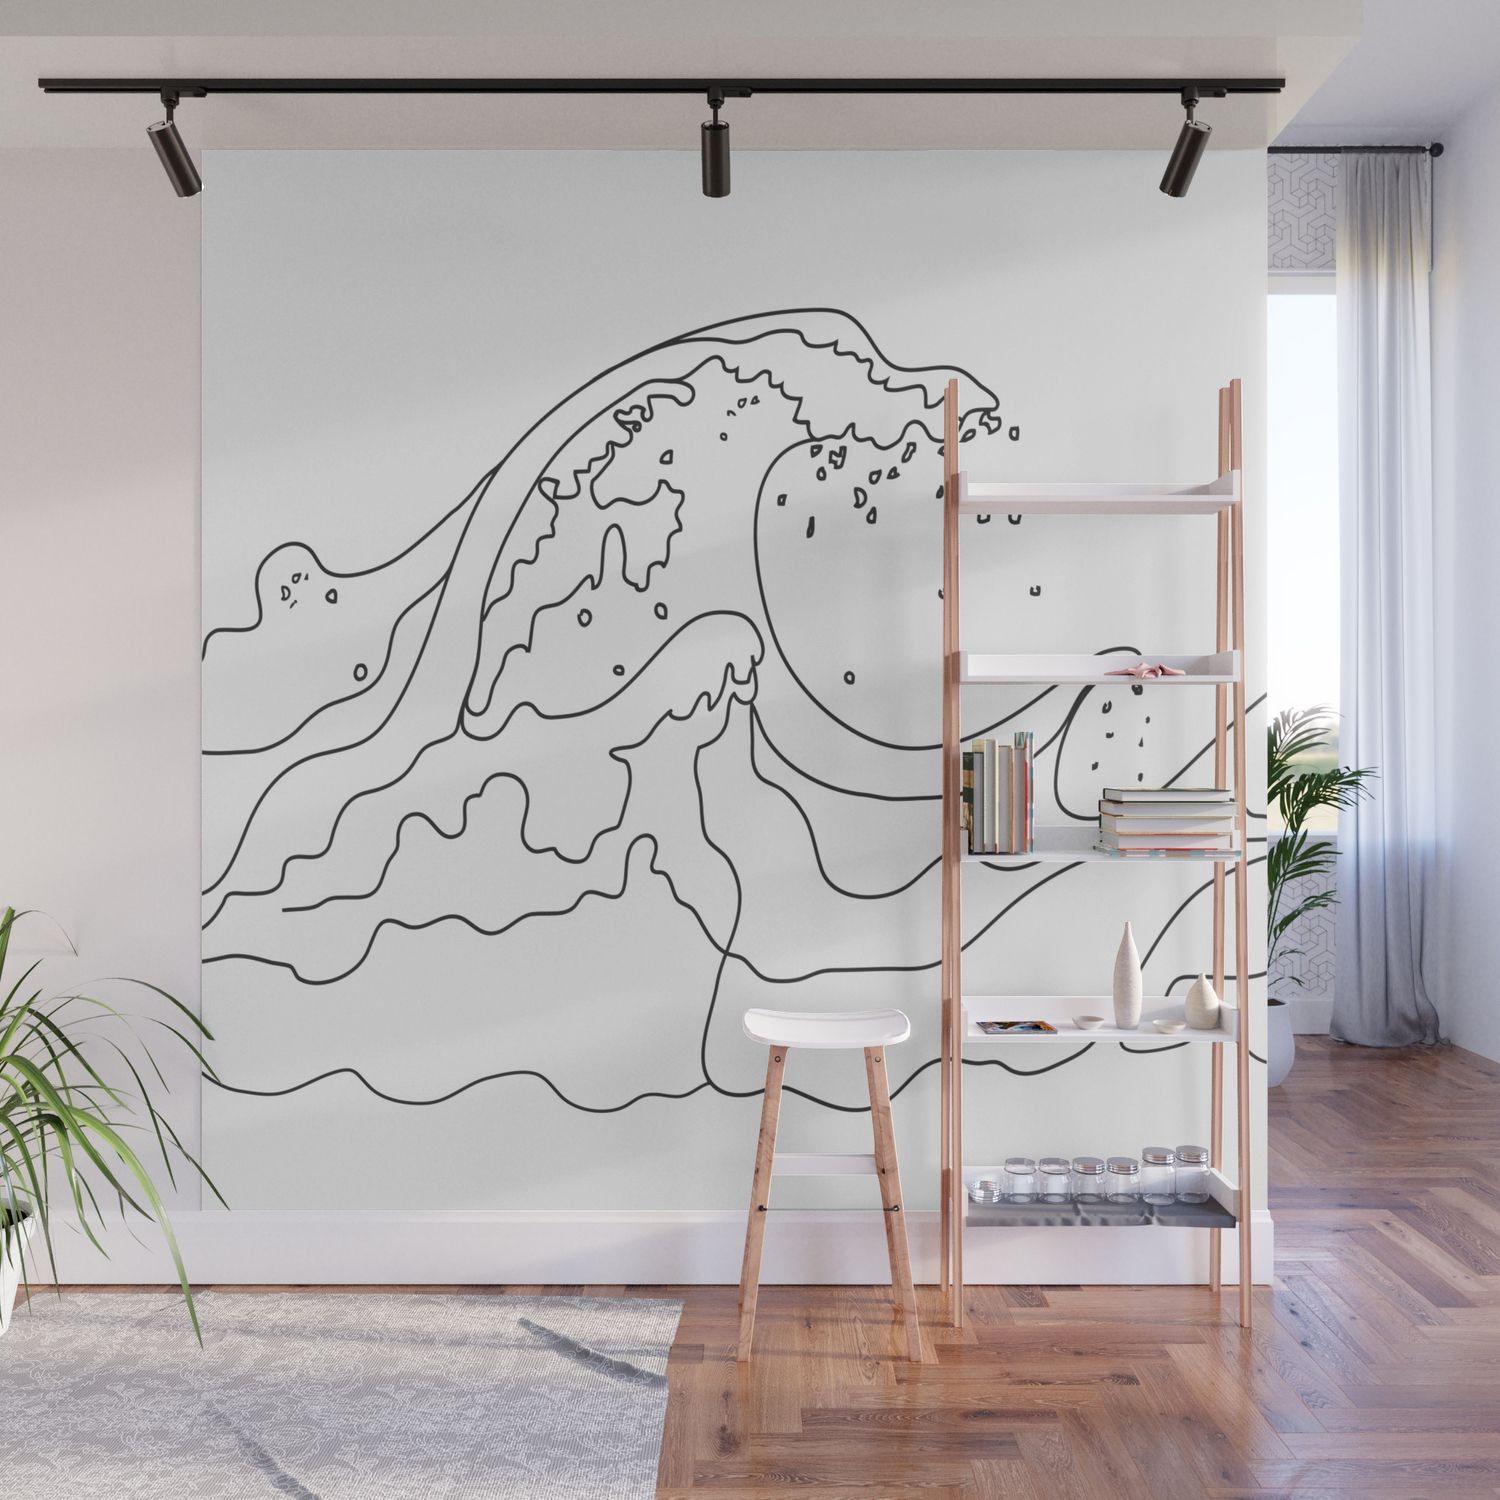 Minimal Line Art Ocean Waves Wall Muralnadja | Society6 Within Most Up To Date Waves Wall Art (View 16 of 20)